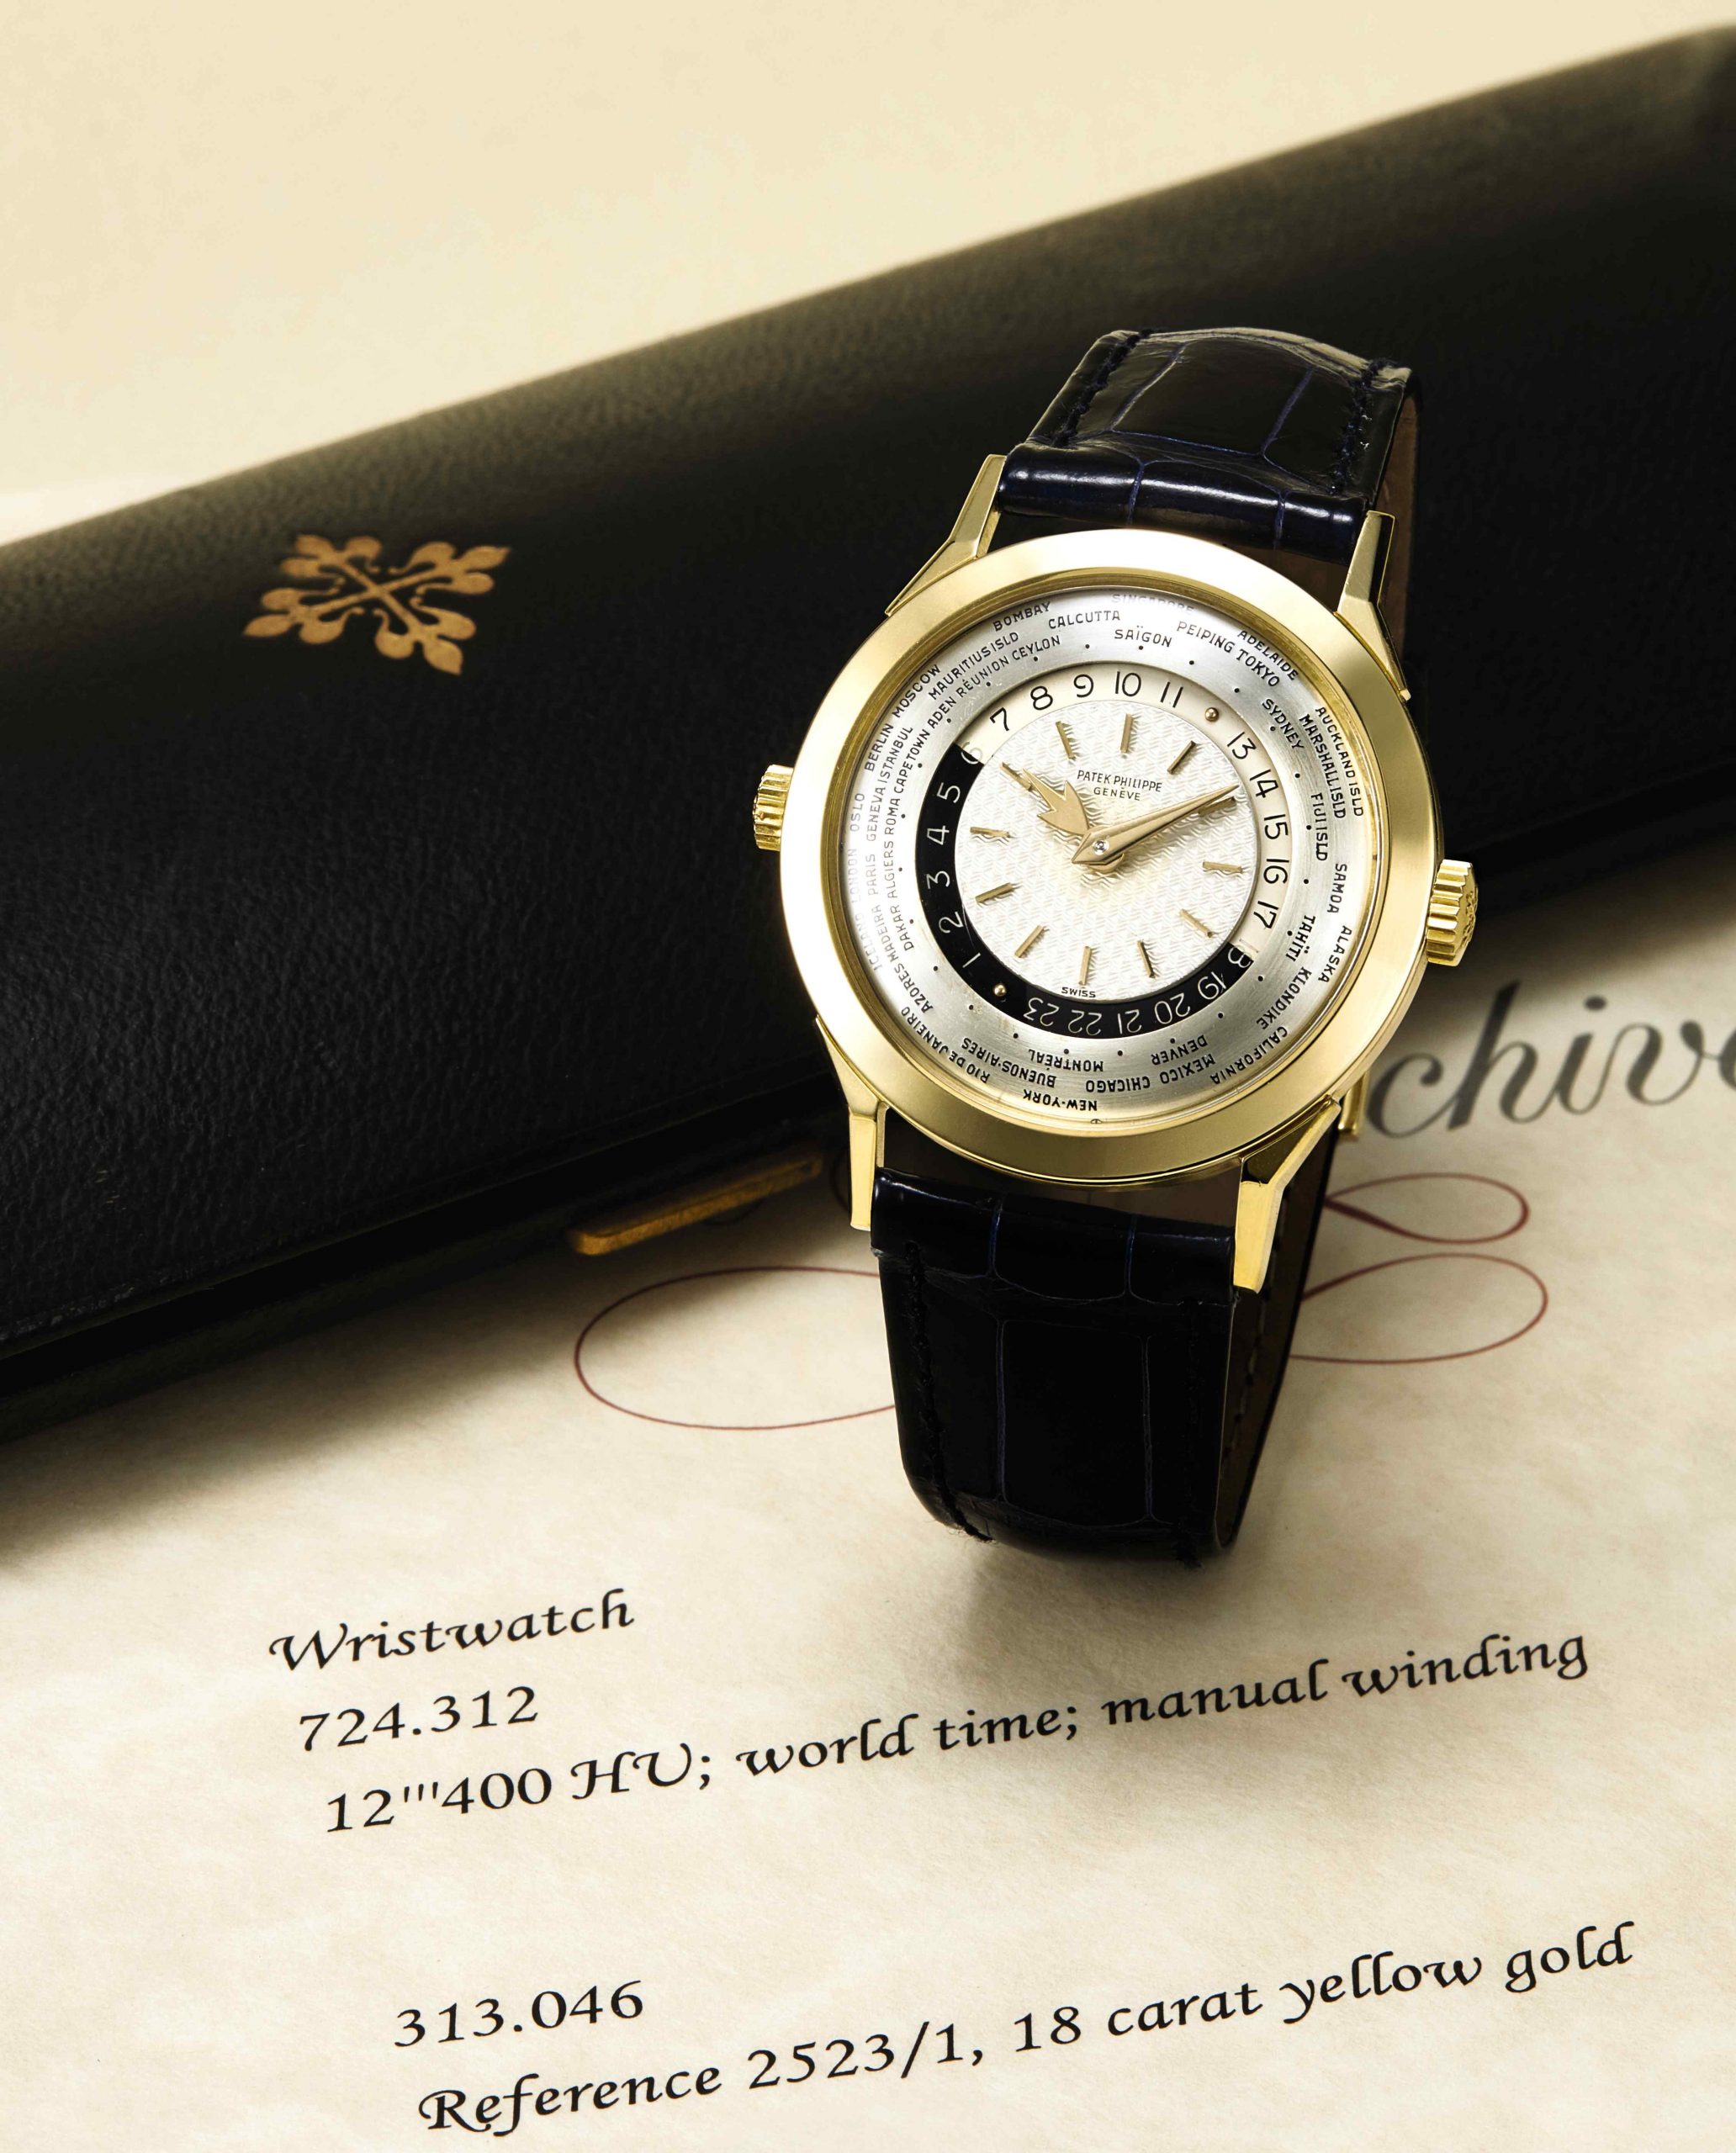 Top 5 Watches From Sotheby’s Important Watches Auction In Hong Kong